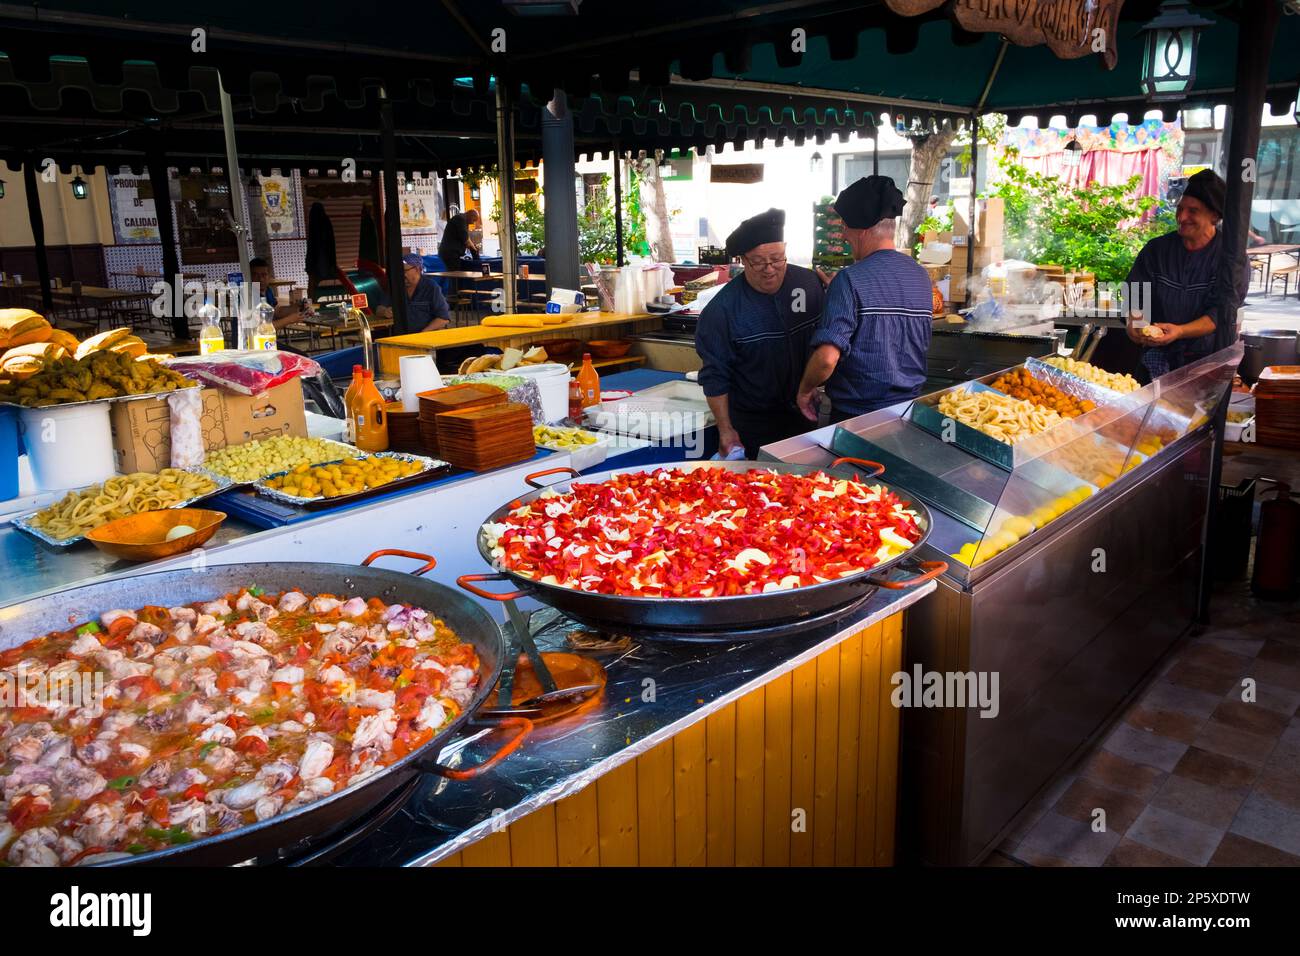 Making Paella at a fiesta in a market in Spain Stock Photo